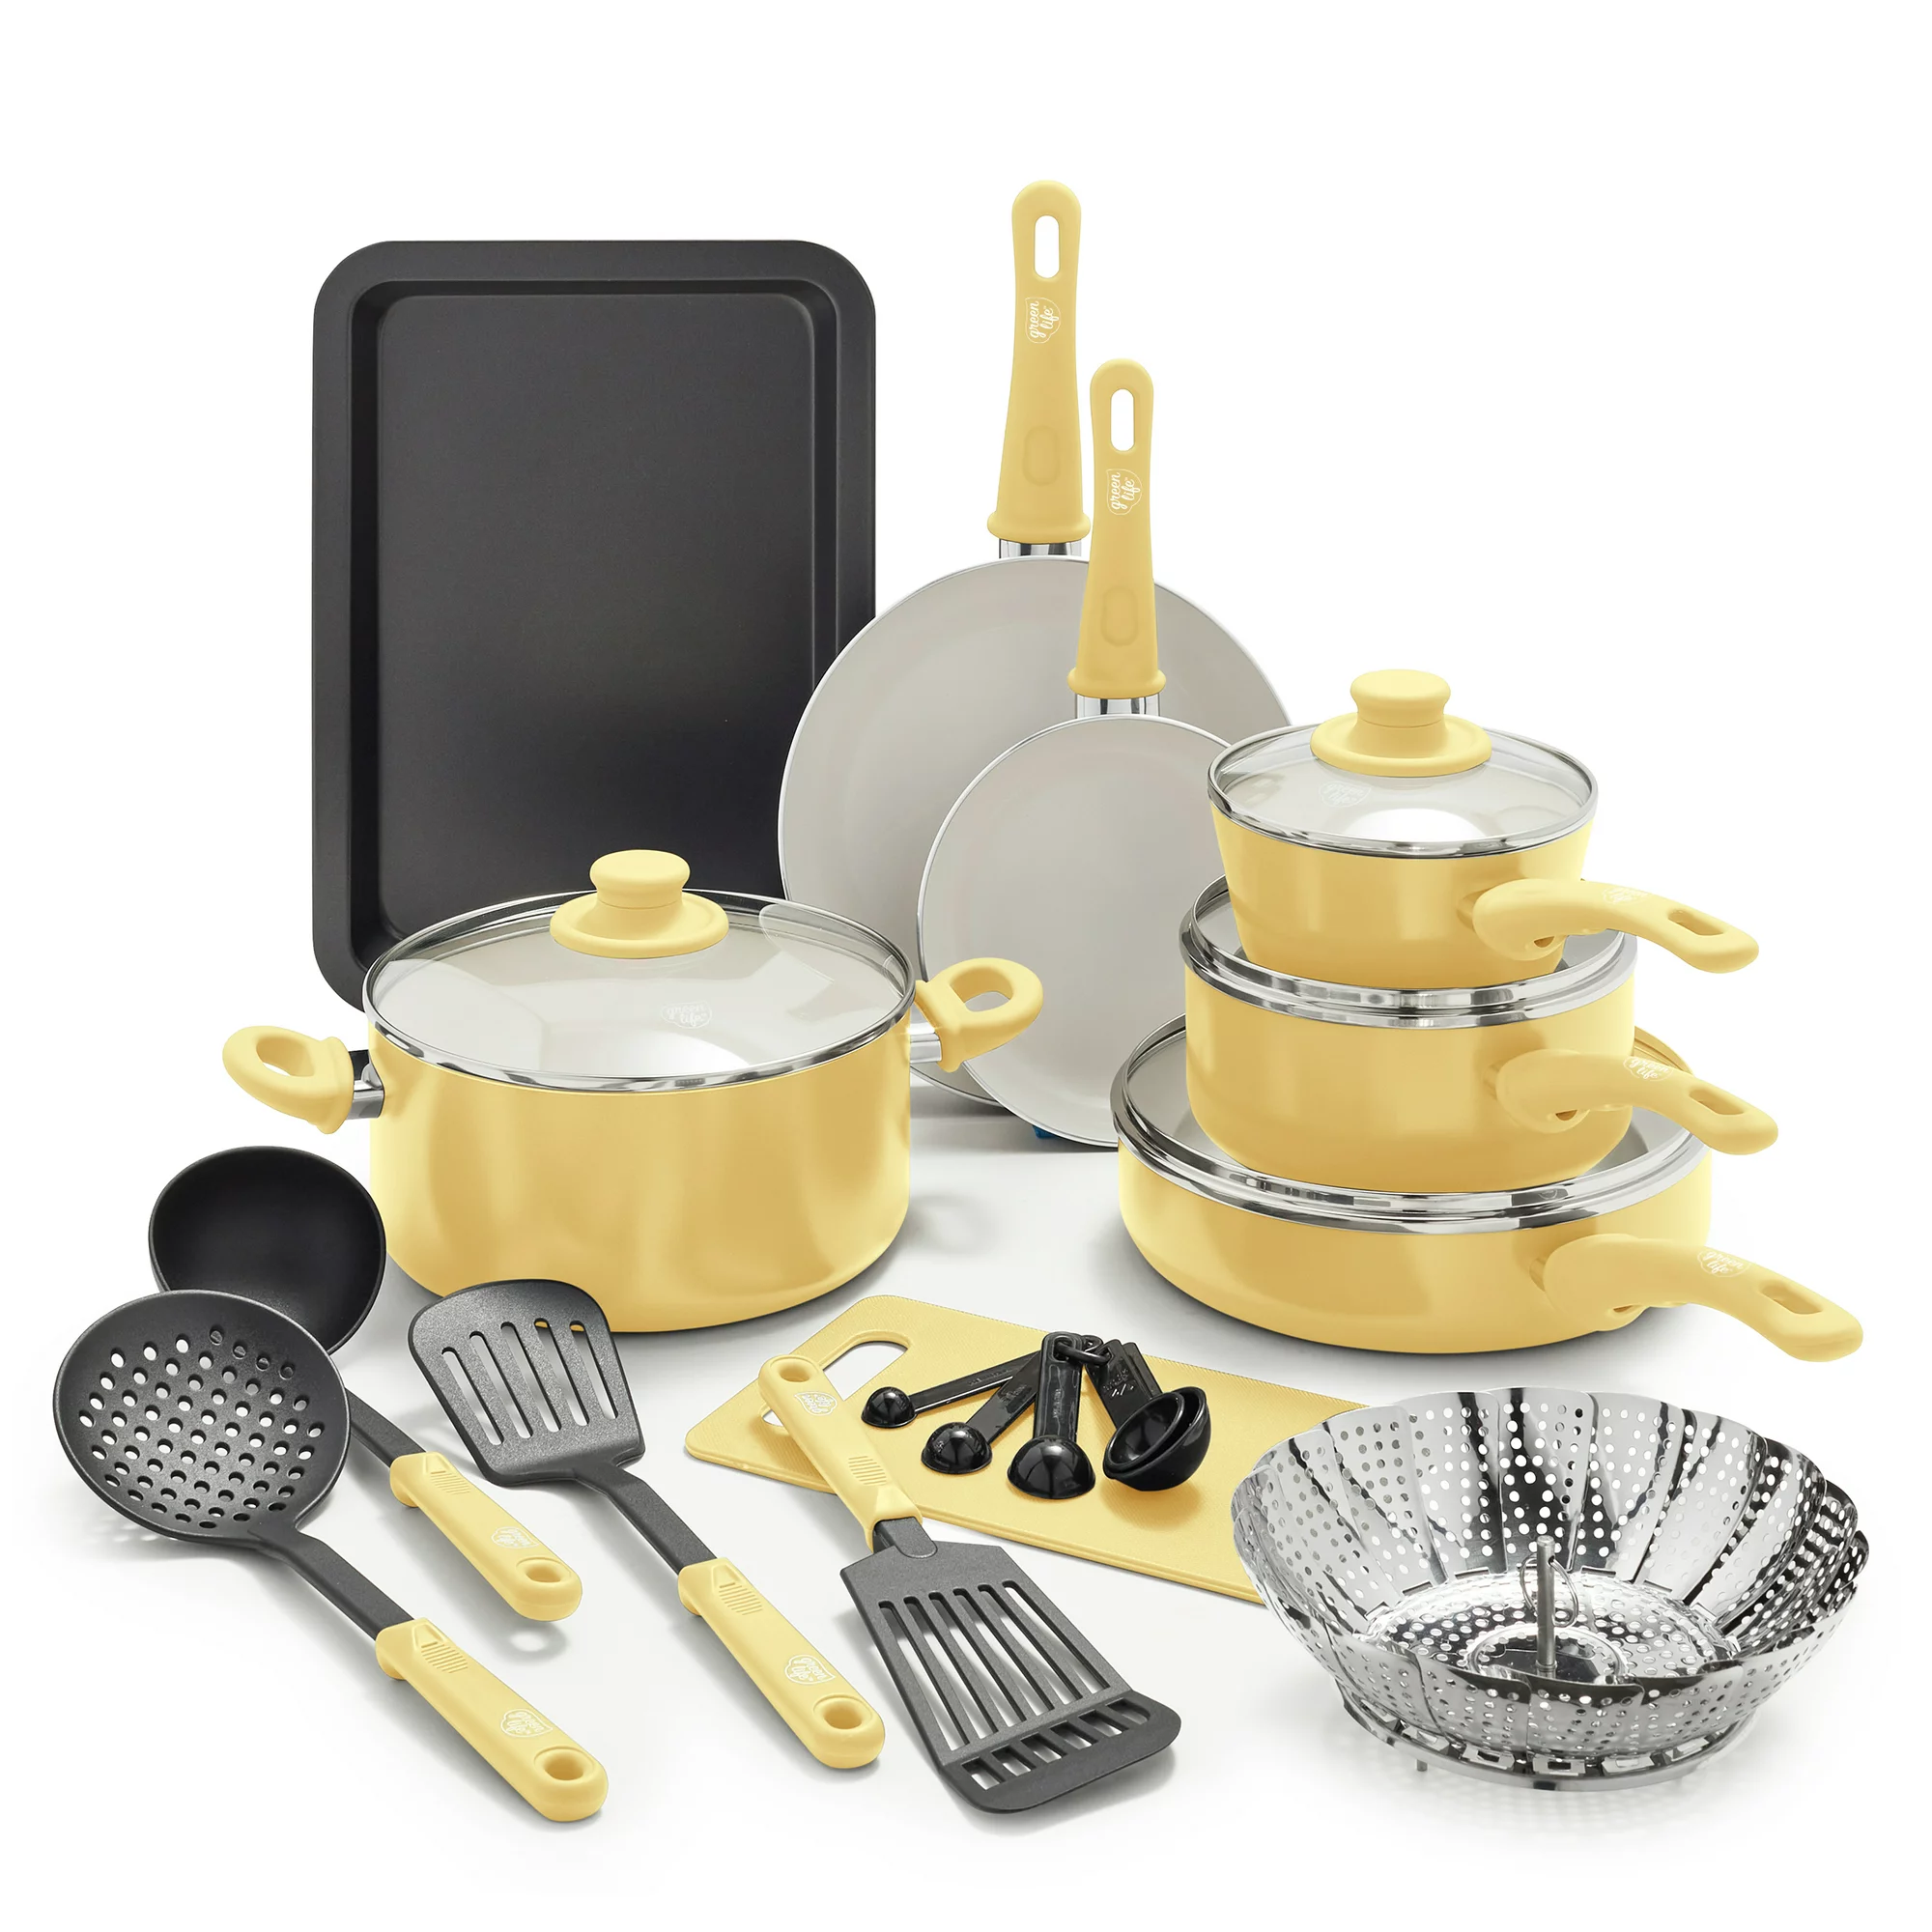 https://discounttoday.net/wp-content/uploads/2022/10/GreenLife-18-Piece-Soft-Grip-Toxin-Free-Healthy-Ceramic-Non-Stick-Cookware-Set-Yellow-Dishwasher-Safe1.webp